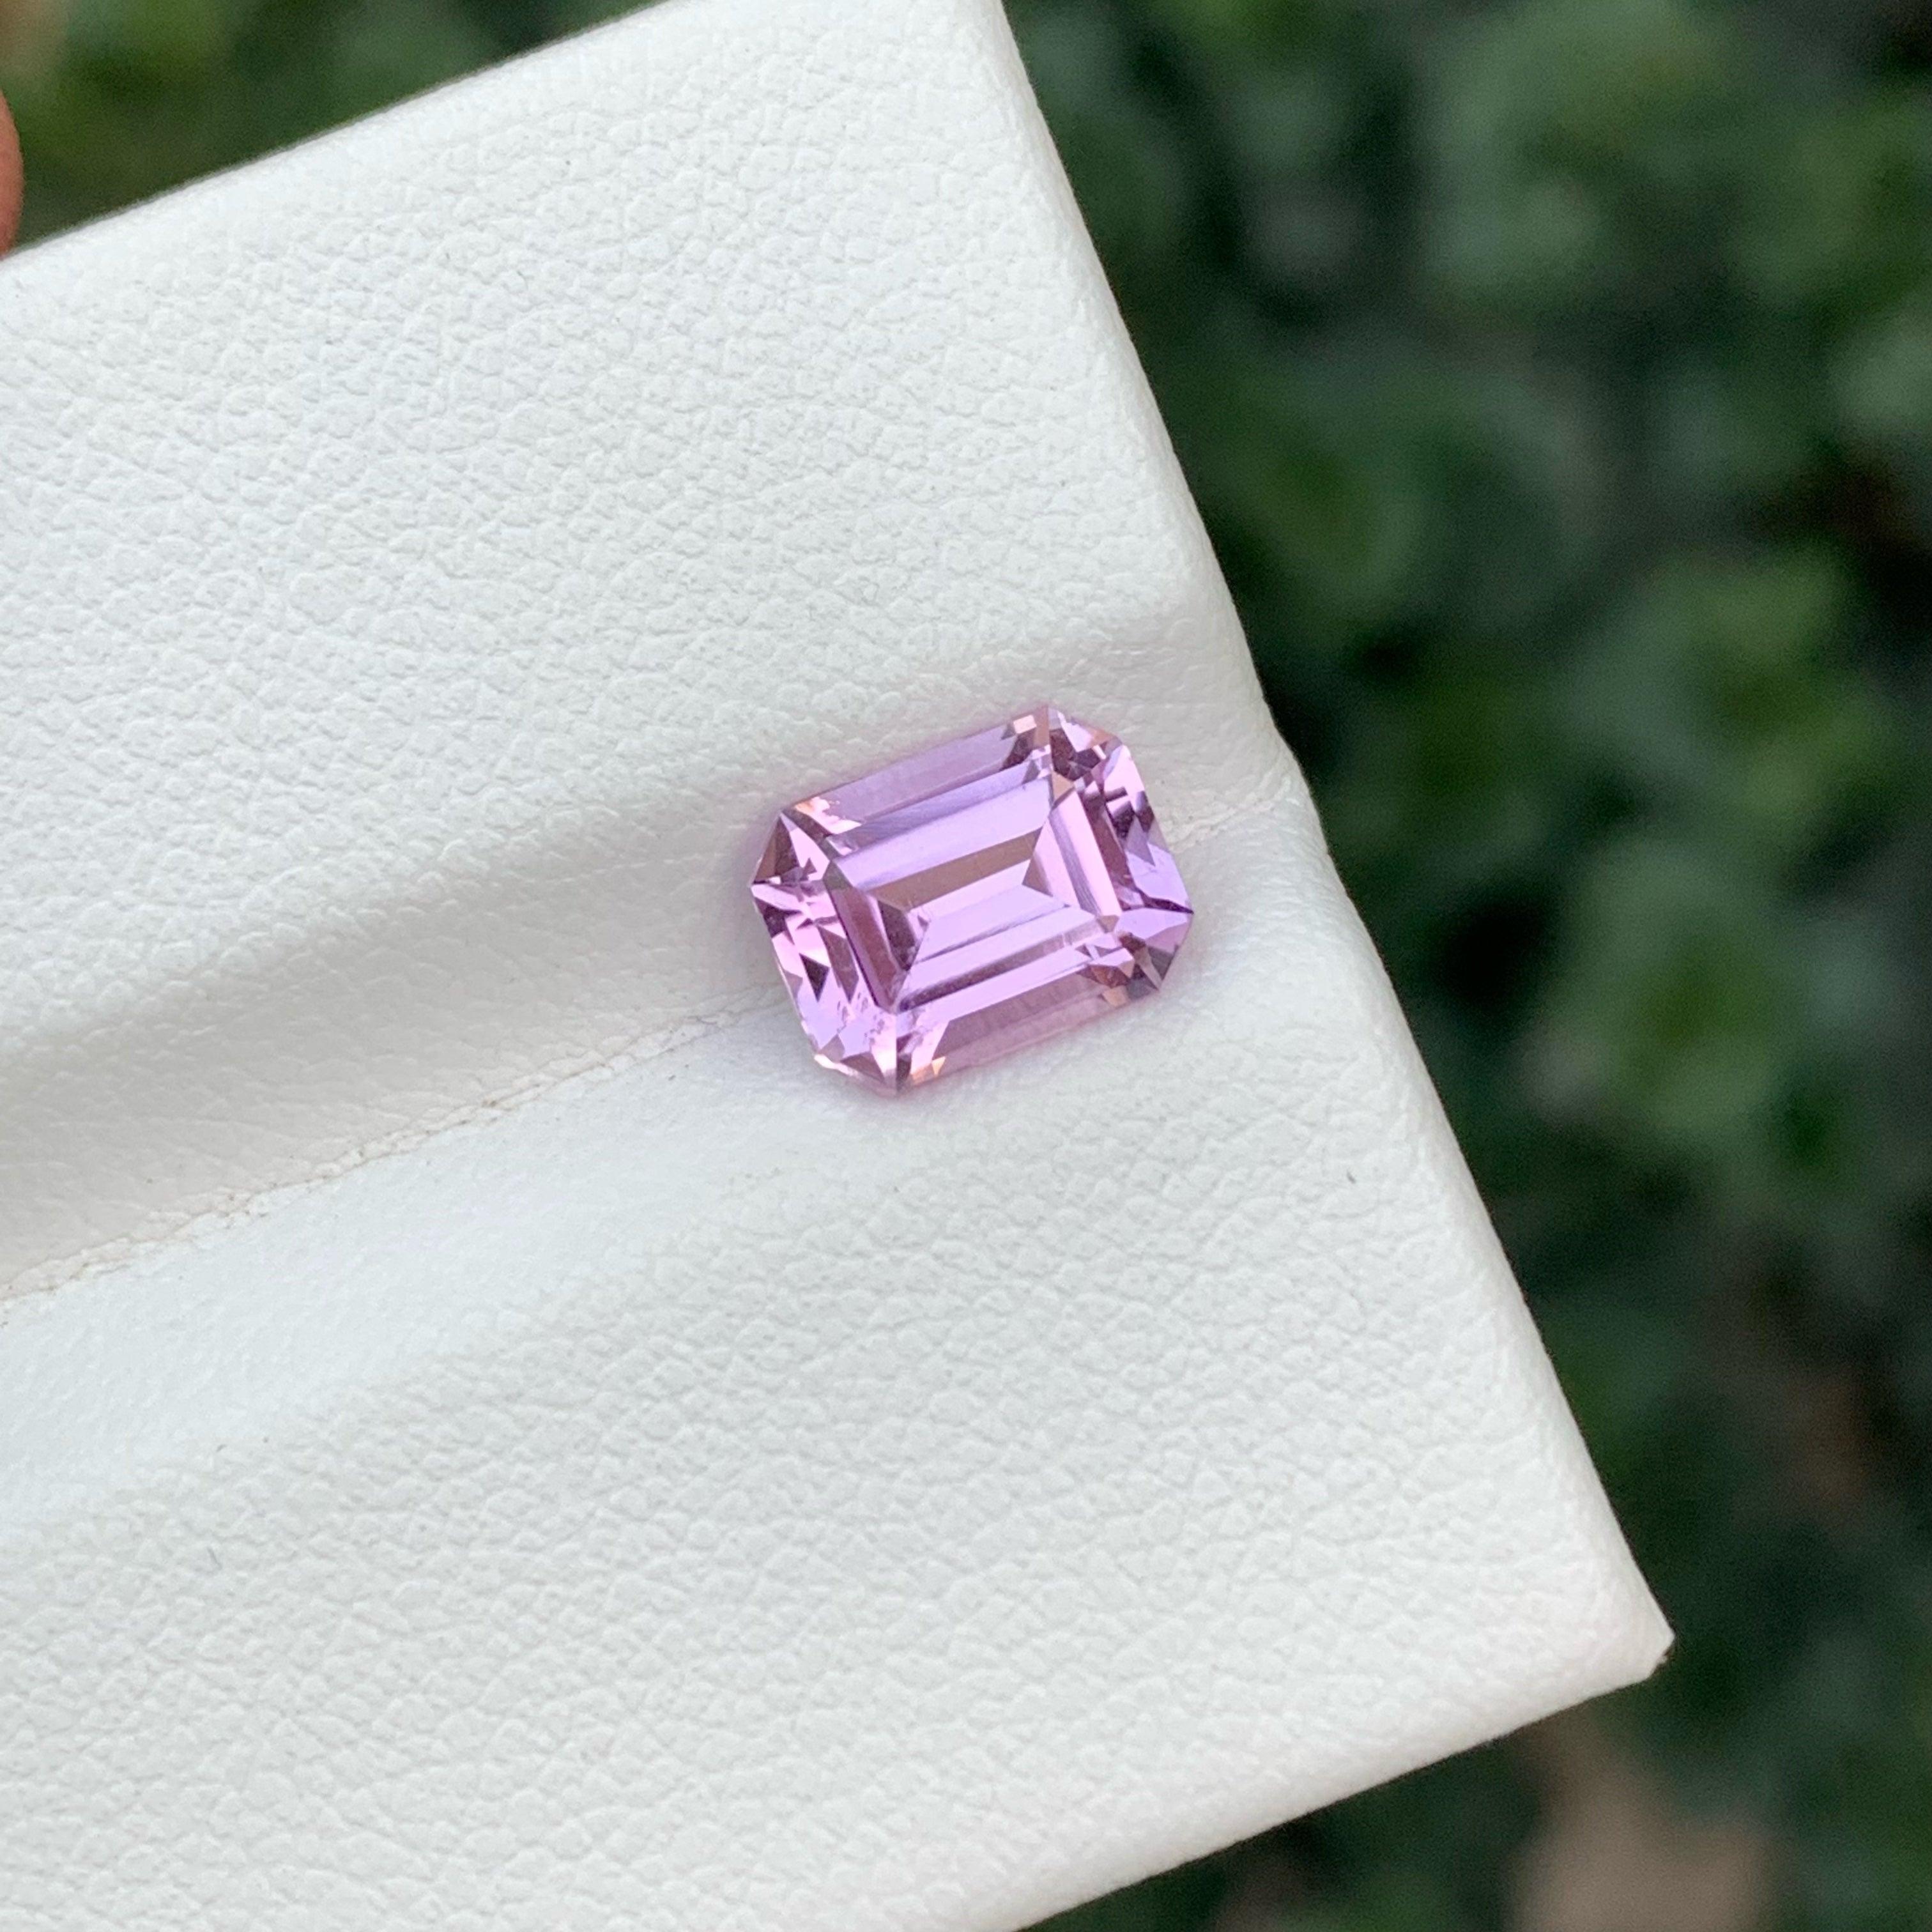 Precious Hot pink Kunzite Gemstone, Available For sale at wholesale price natural high quality 2.35 Carats Eye Clean Loose Kunzite From Nigeria.

Product Information:
GEMSTONE TYPE:	Precious Hot pink Kunzite Gemstone
WEIGHT:	2.35